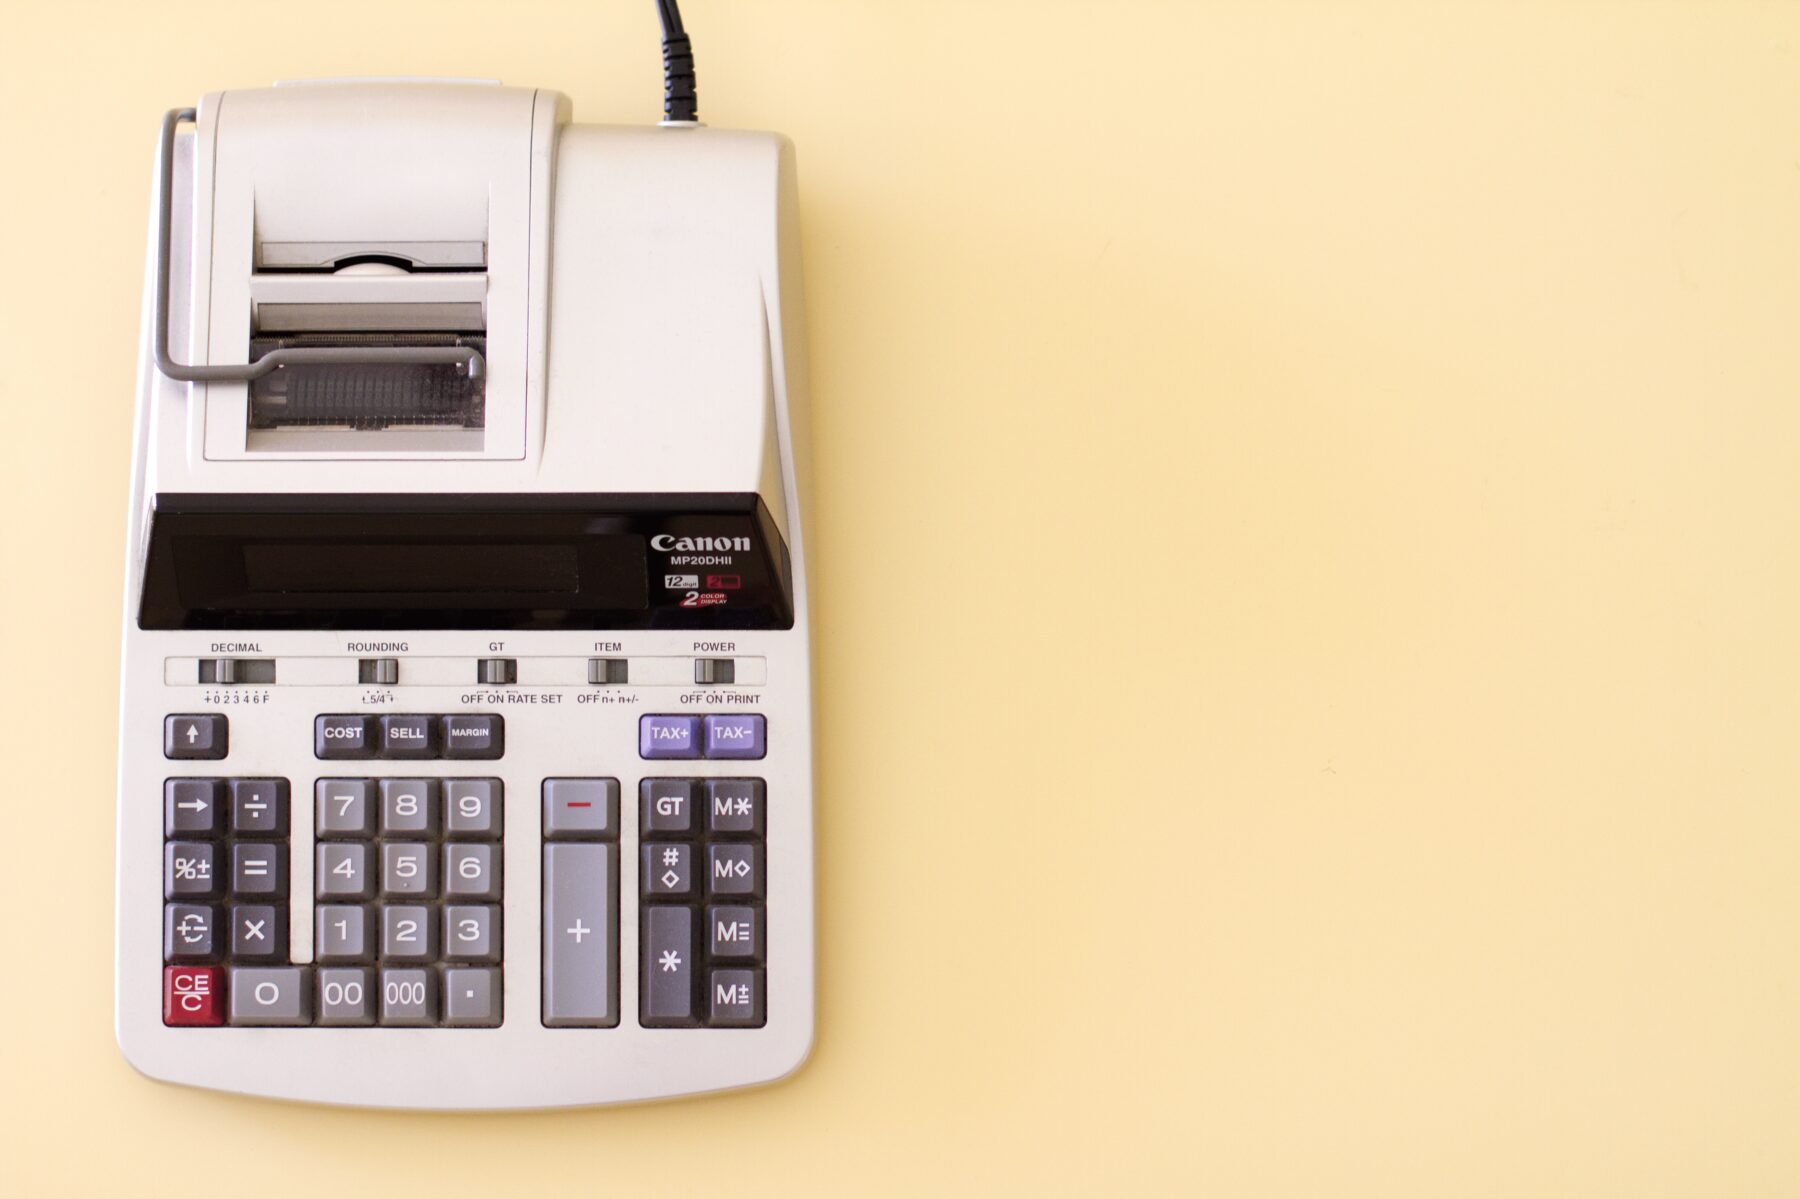 An accounting calculator is shown on a cream background.